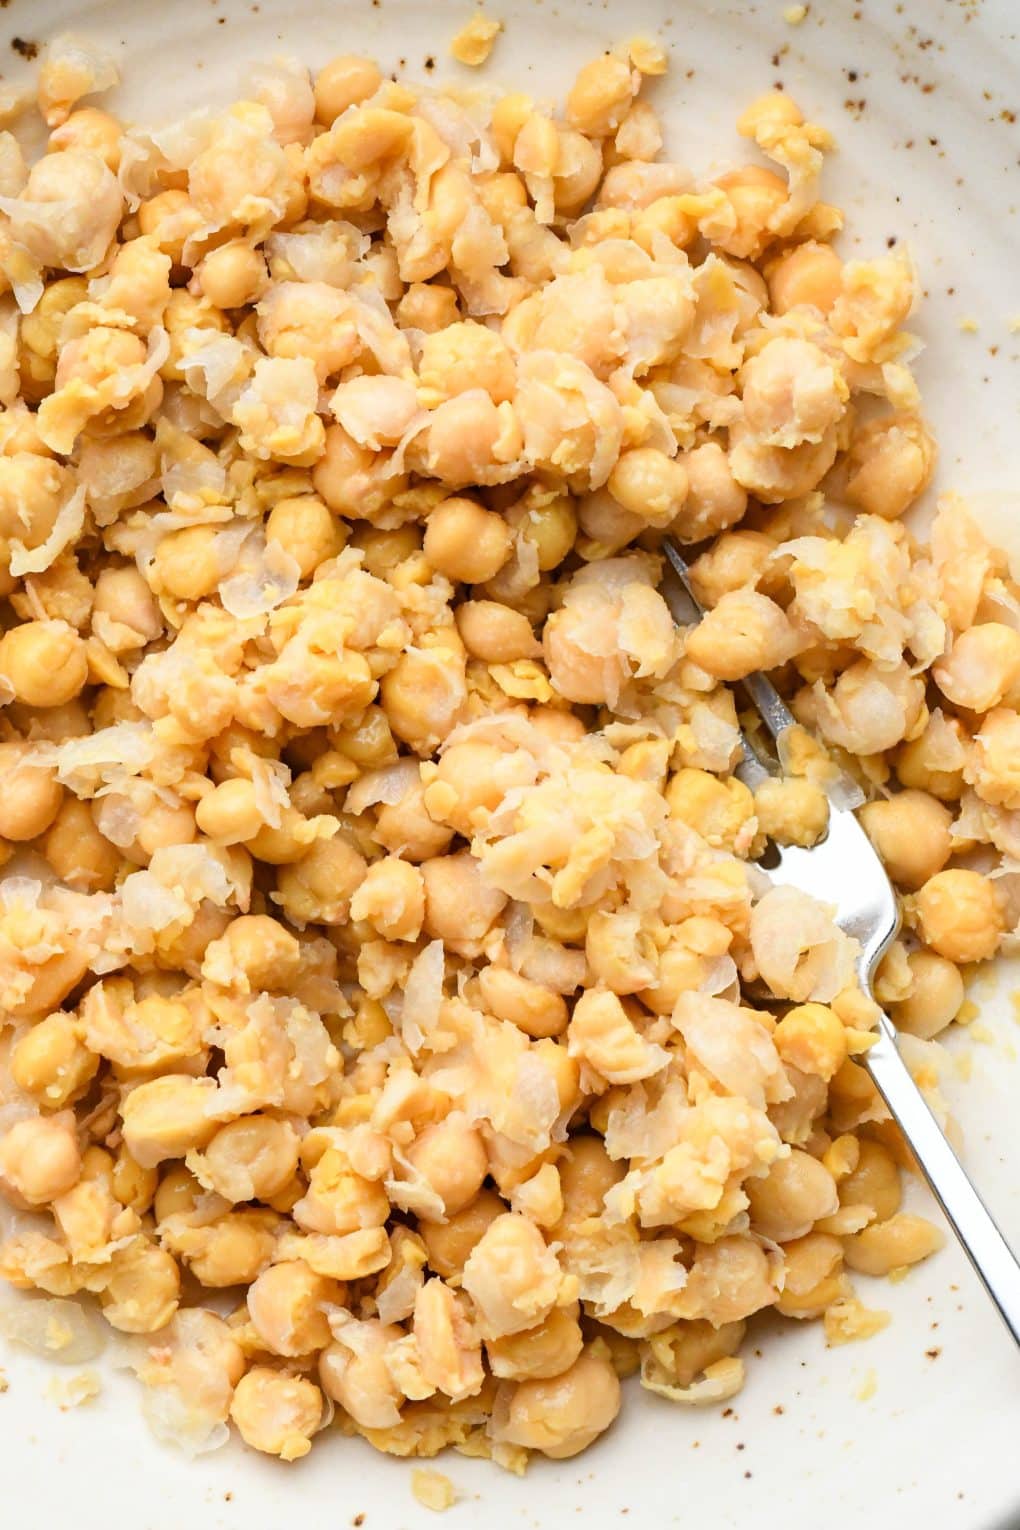 Up close image of the smashed chickpeas to show the rough texture, with some chickpeas left whole.